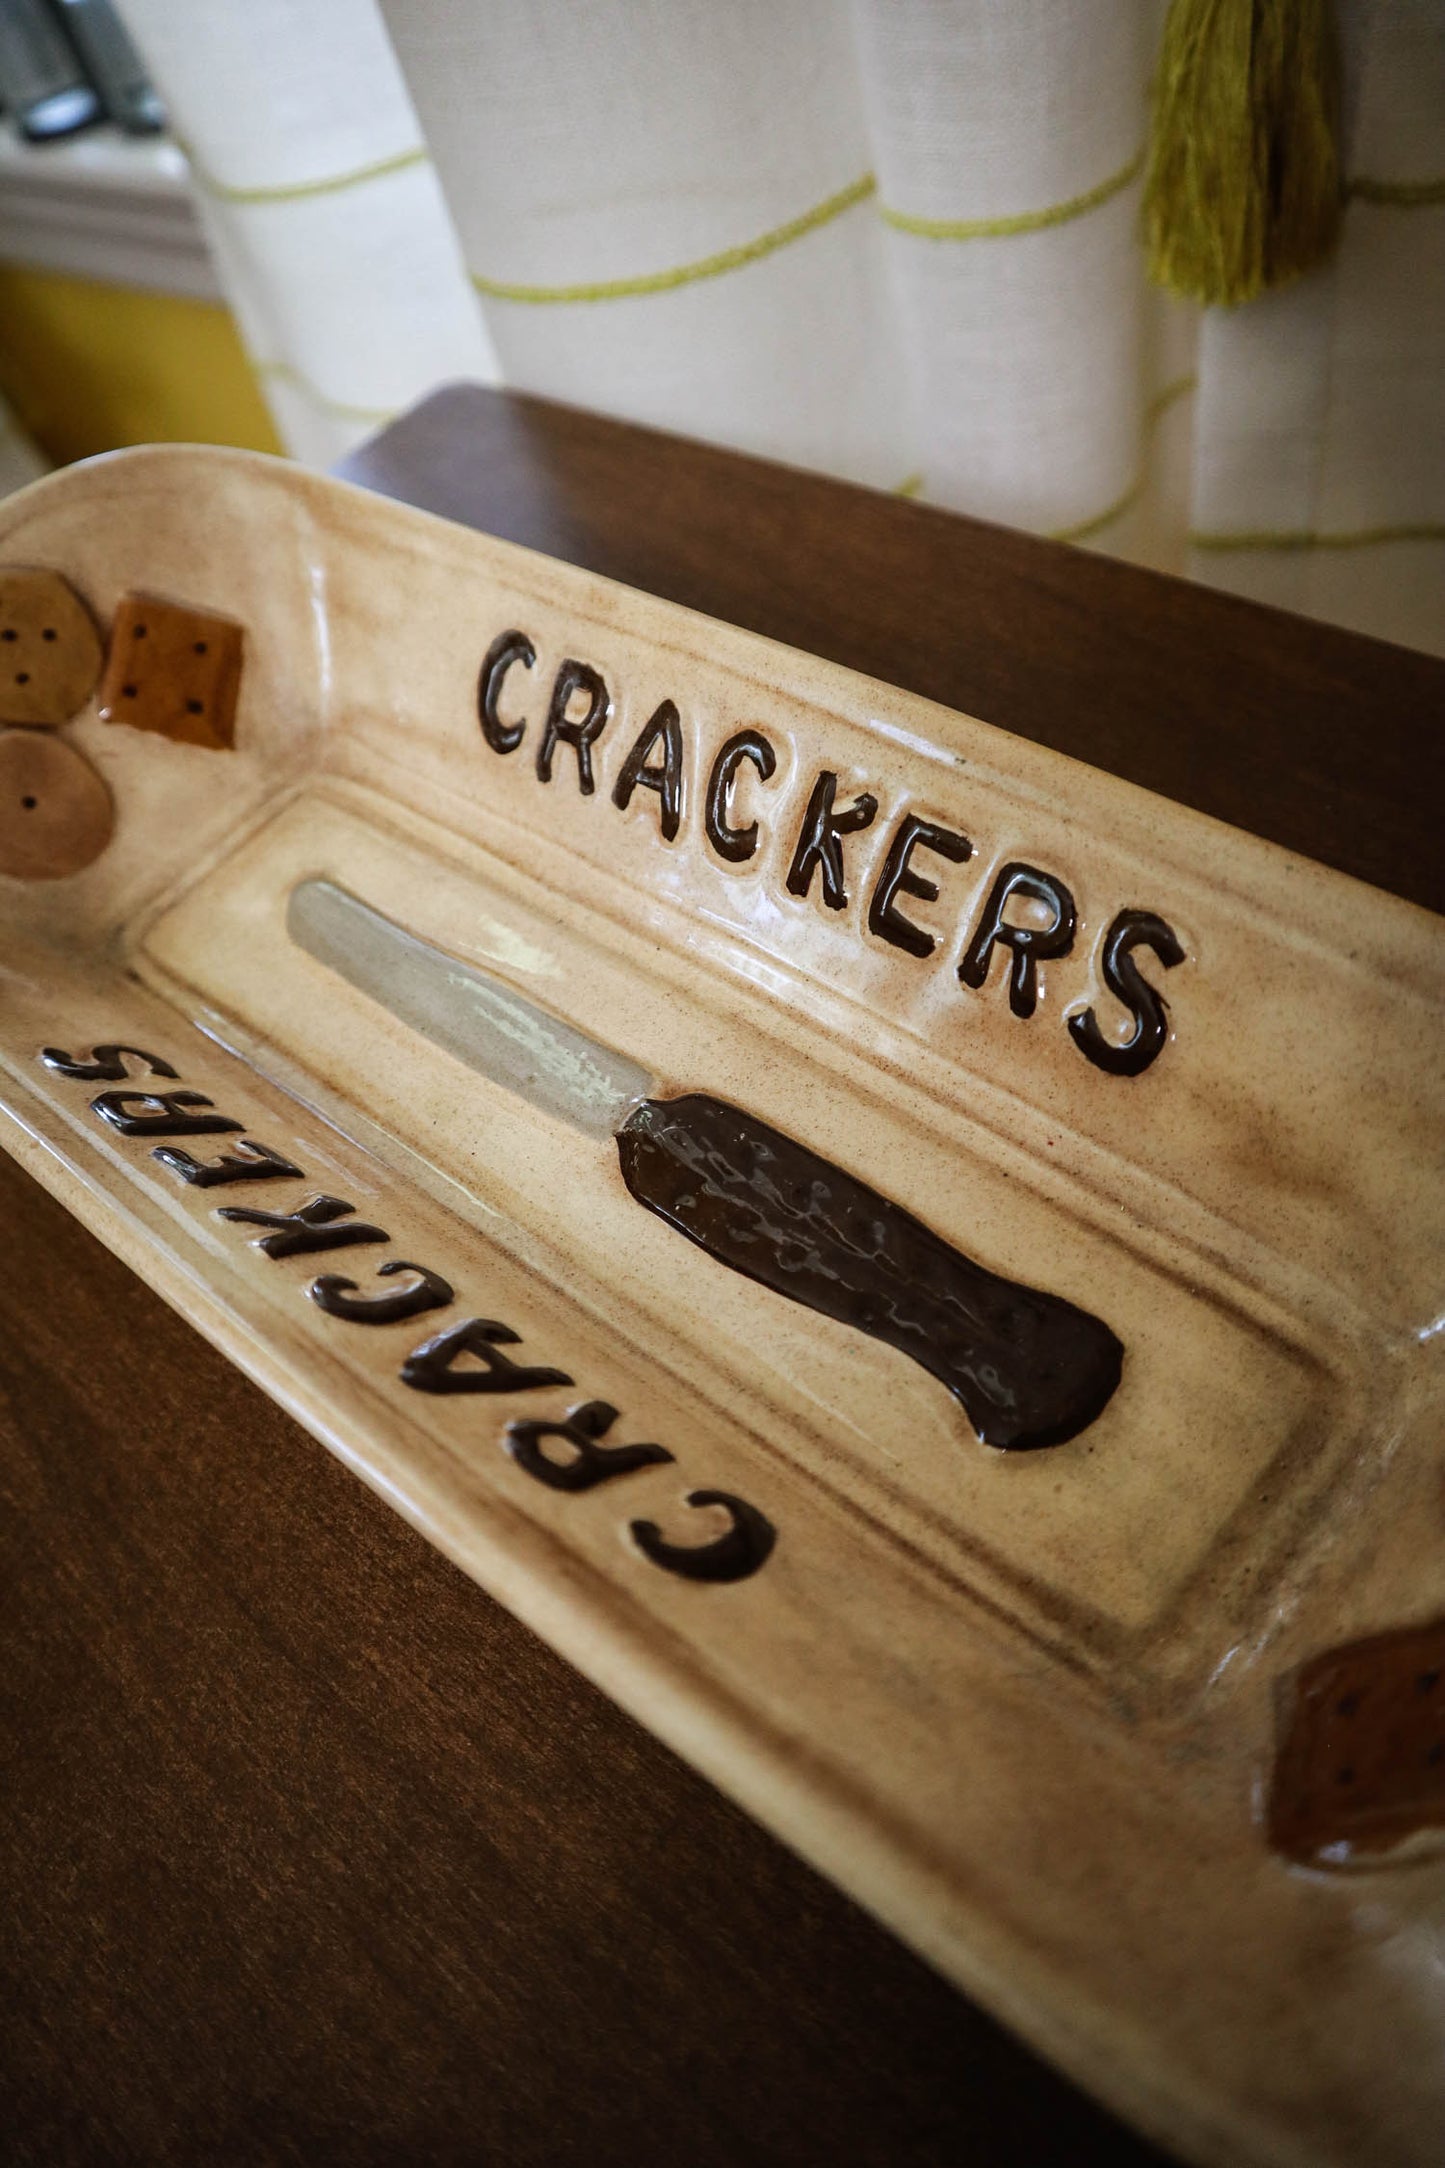 A Tray for Crackers